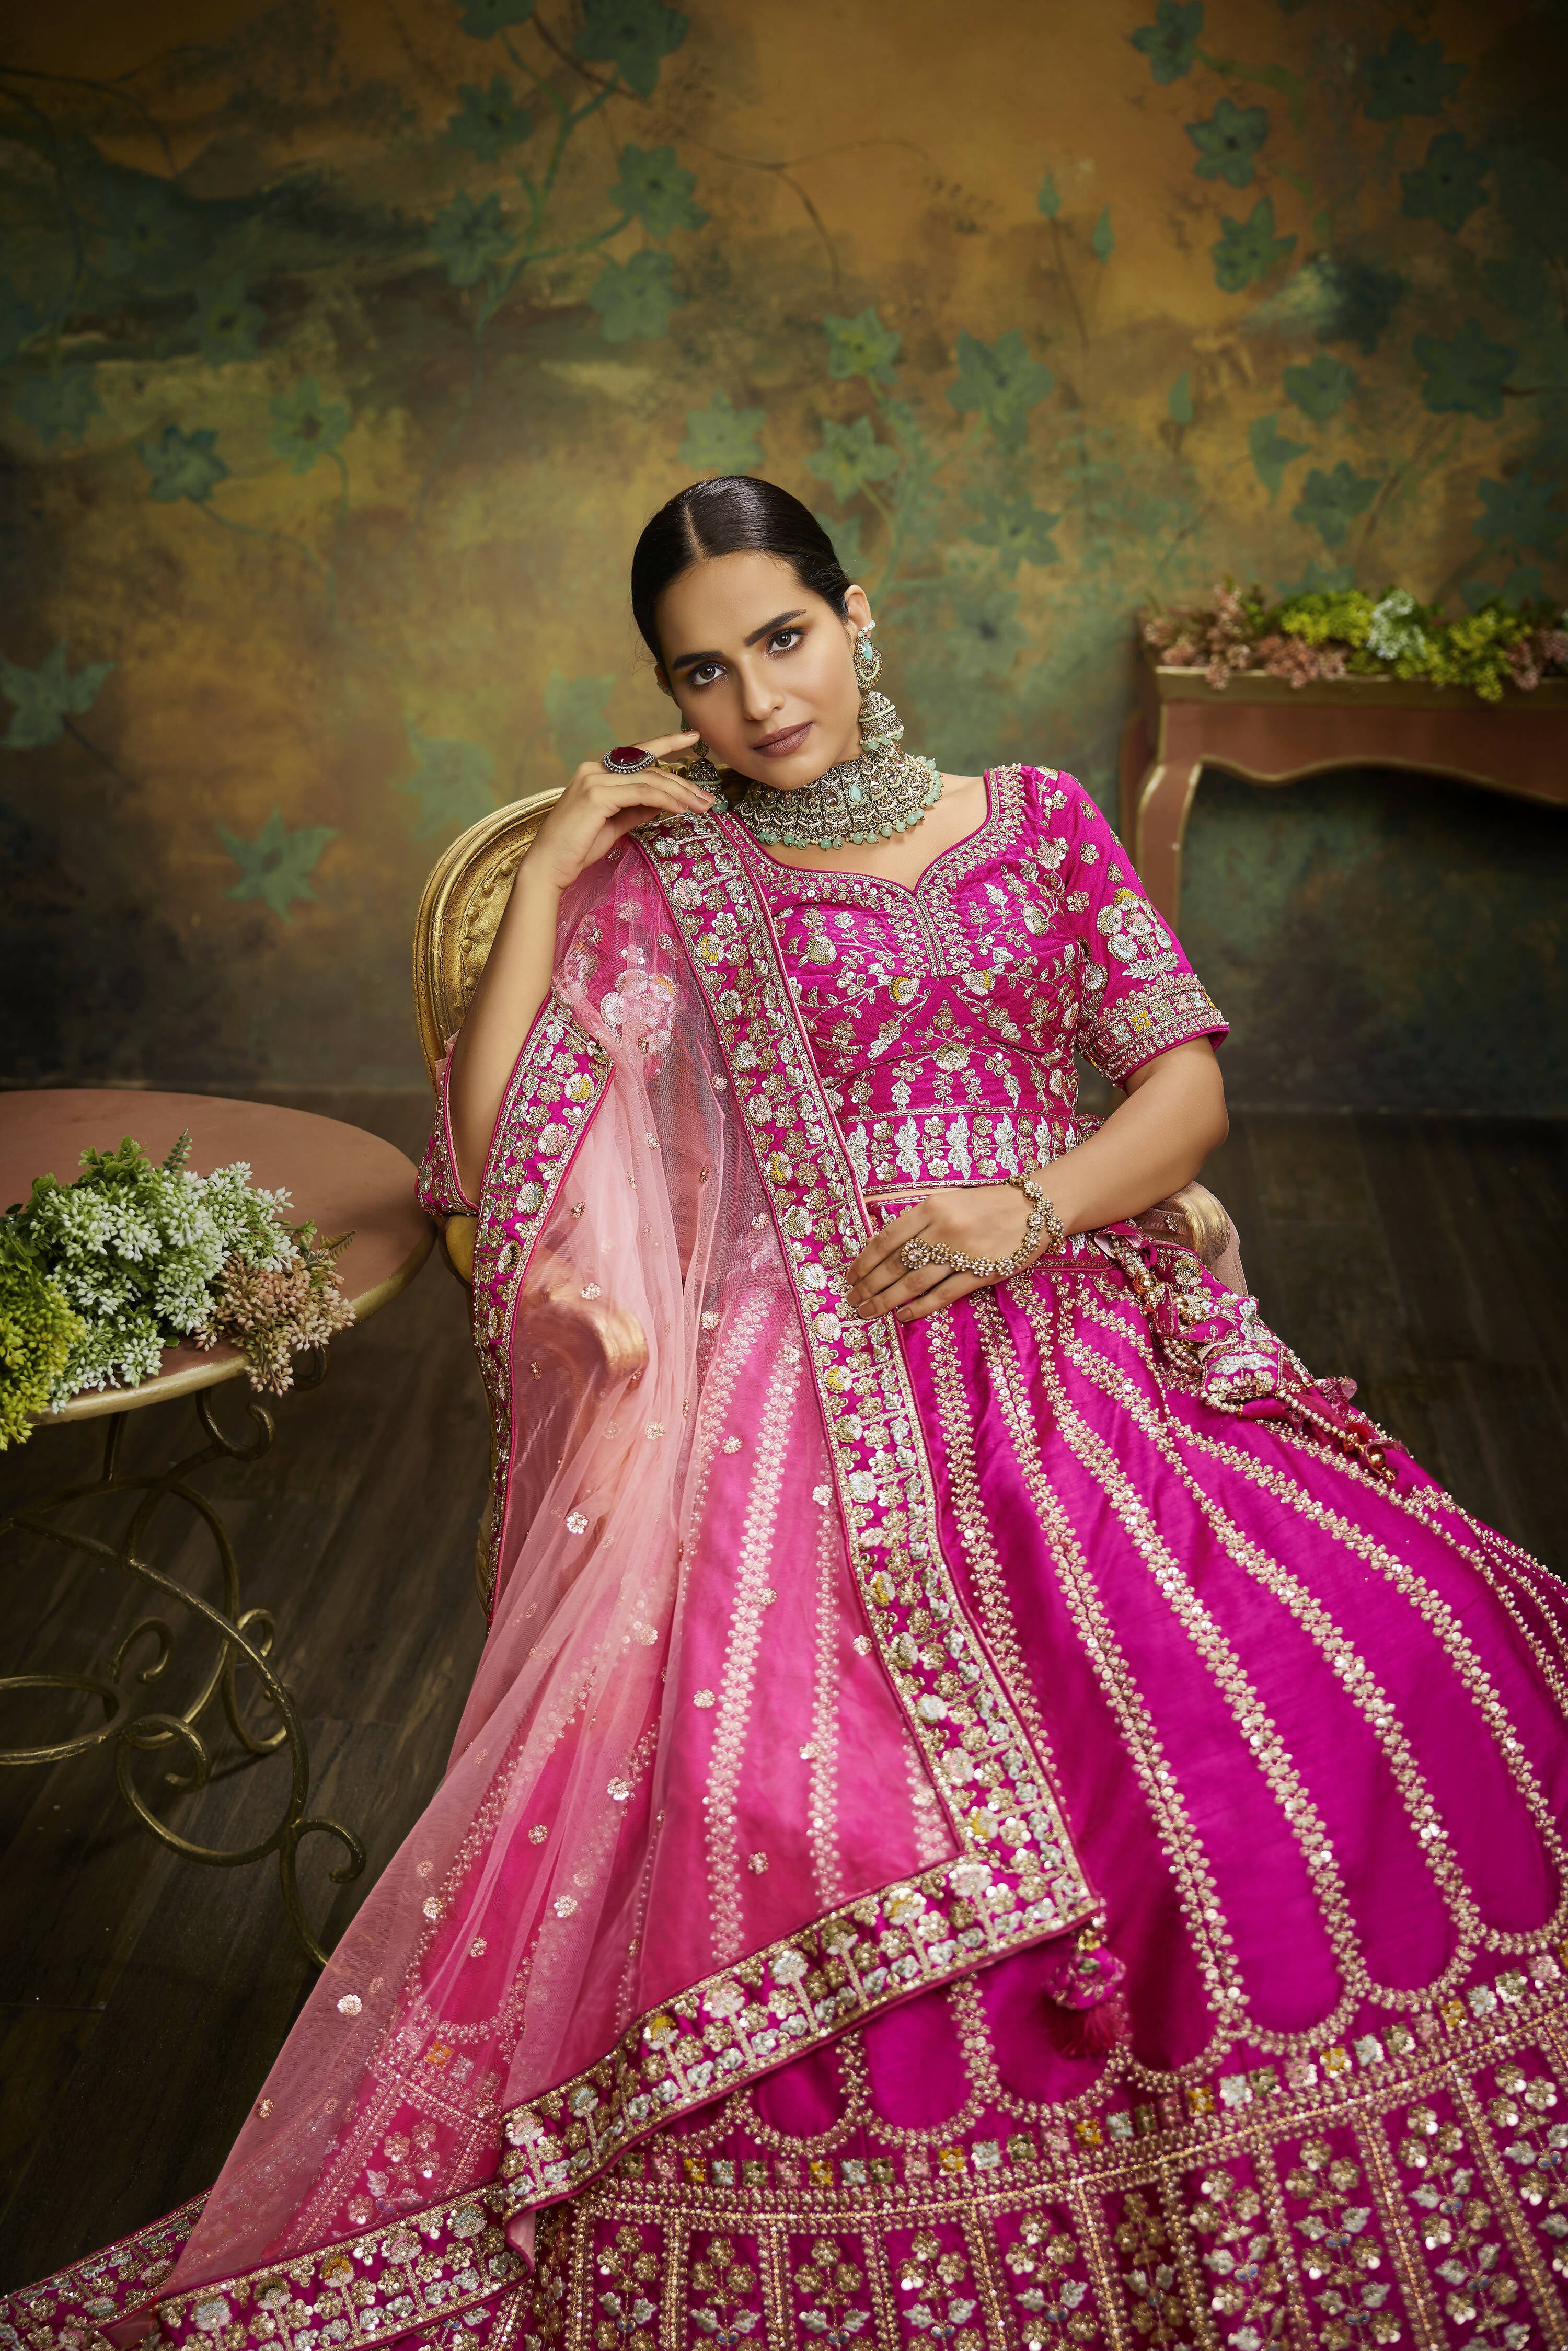 You can now rent your wedding lehenga for just Rs 5000 | Business Insider  India